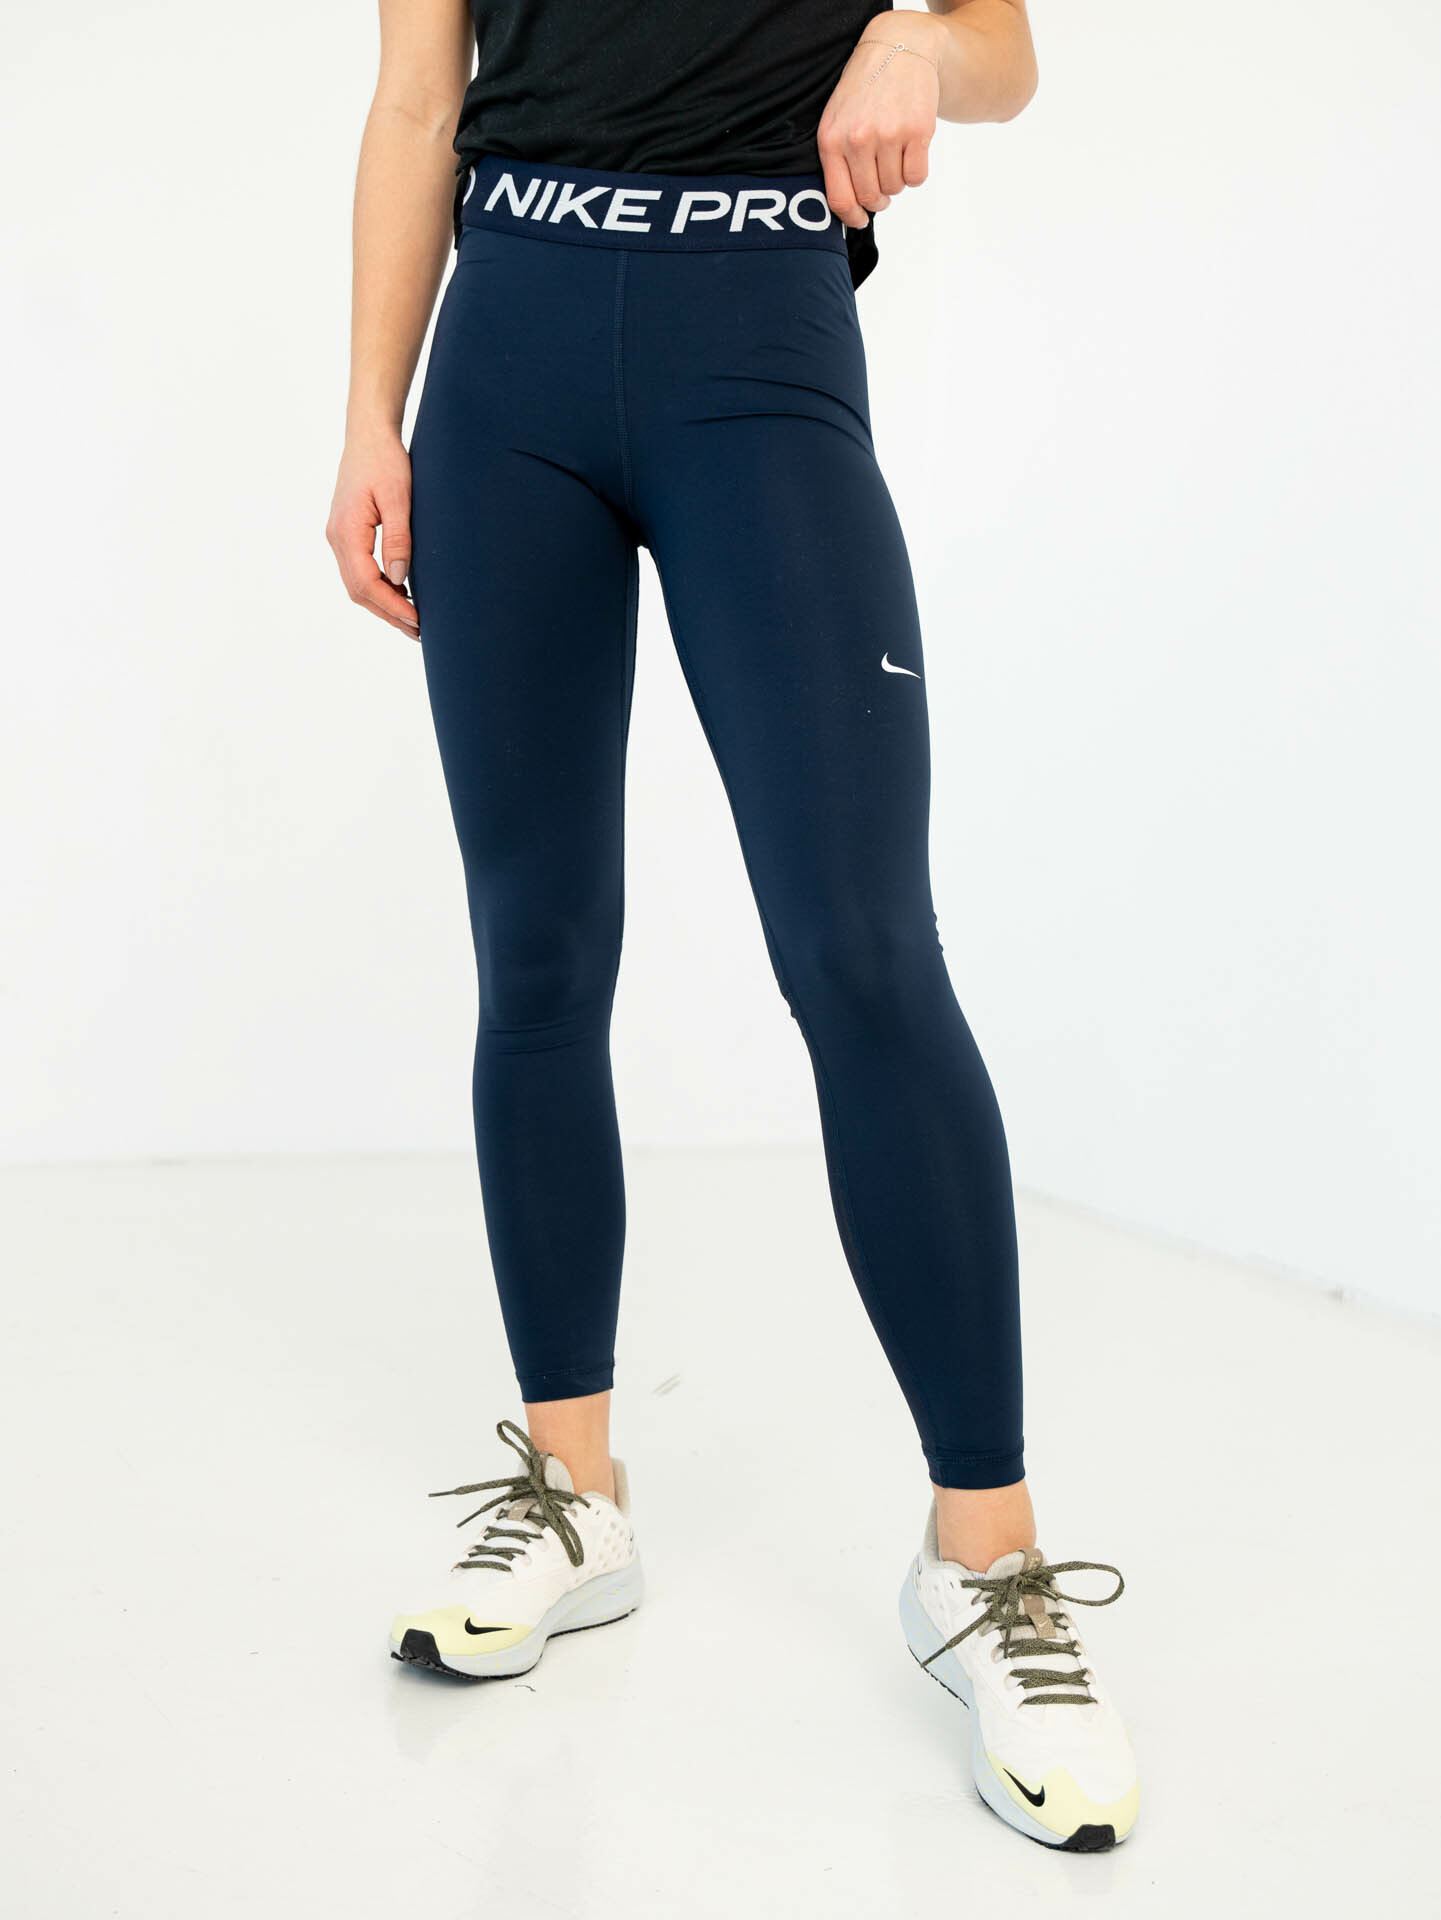 Pro Mid Rise tights